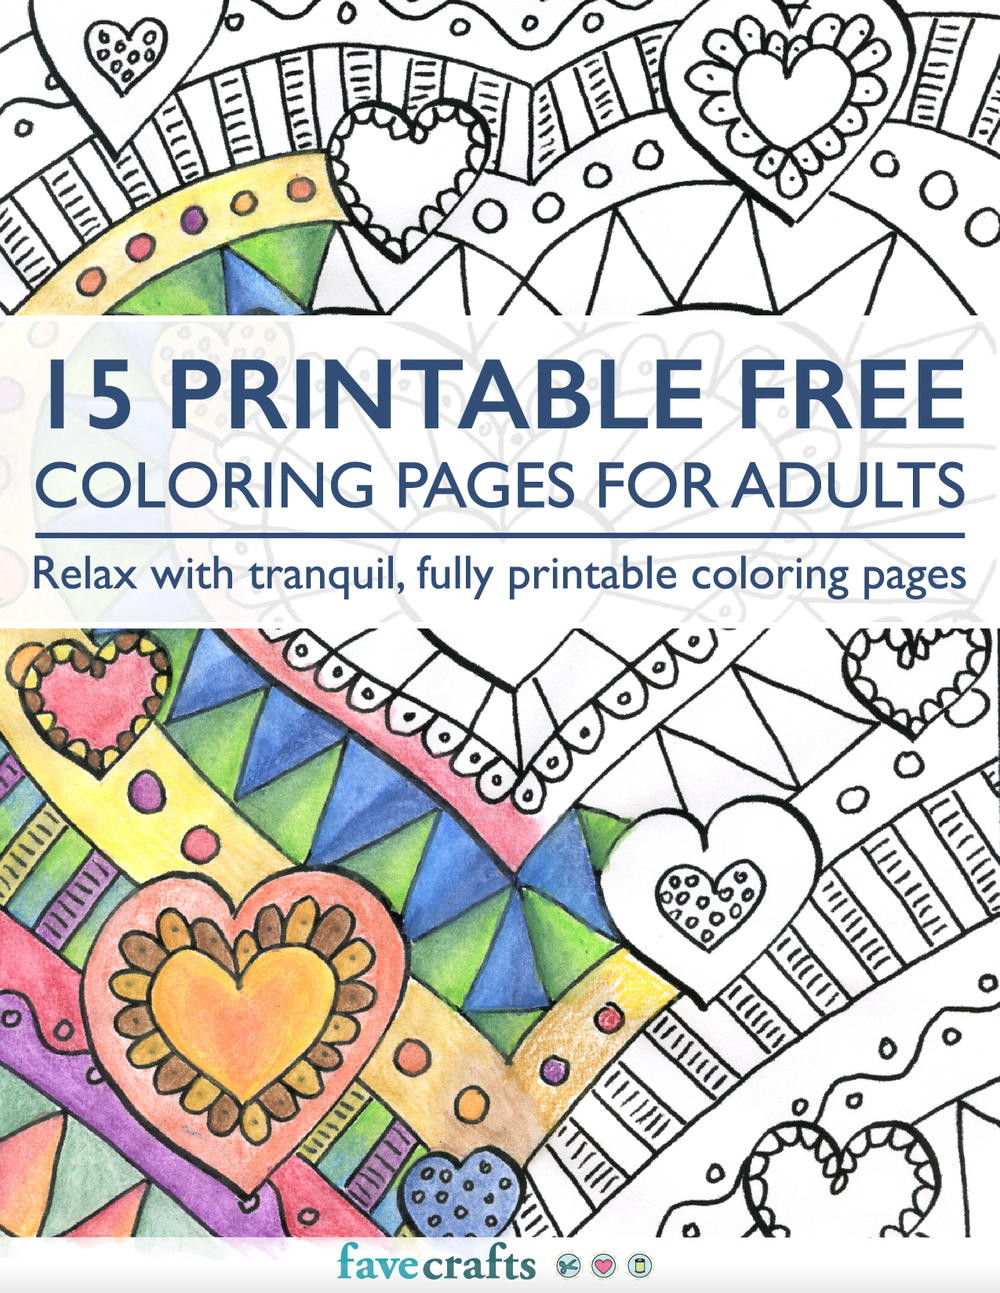 Free Adult Coloring Book Pdf
 15 Printable Free Coloring Pages for Adults [PDF